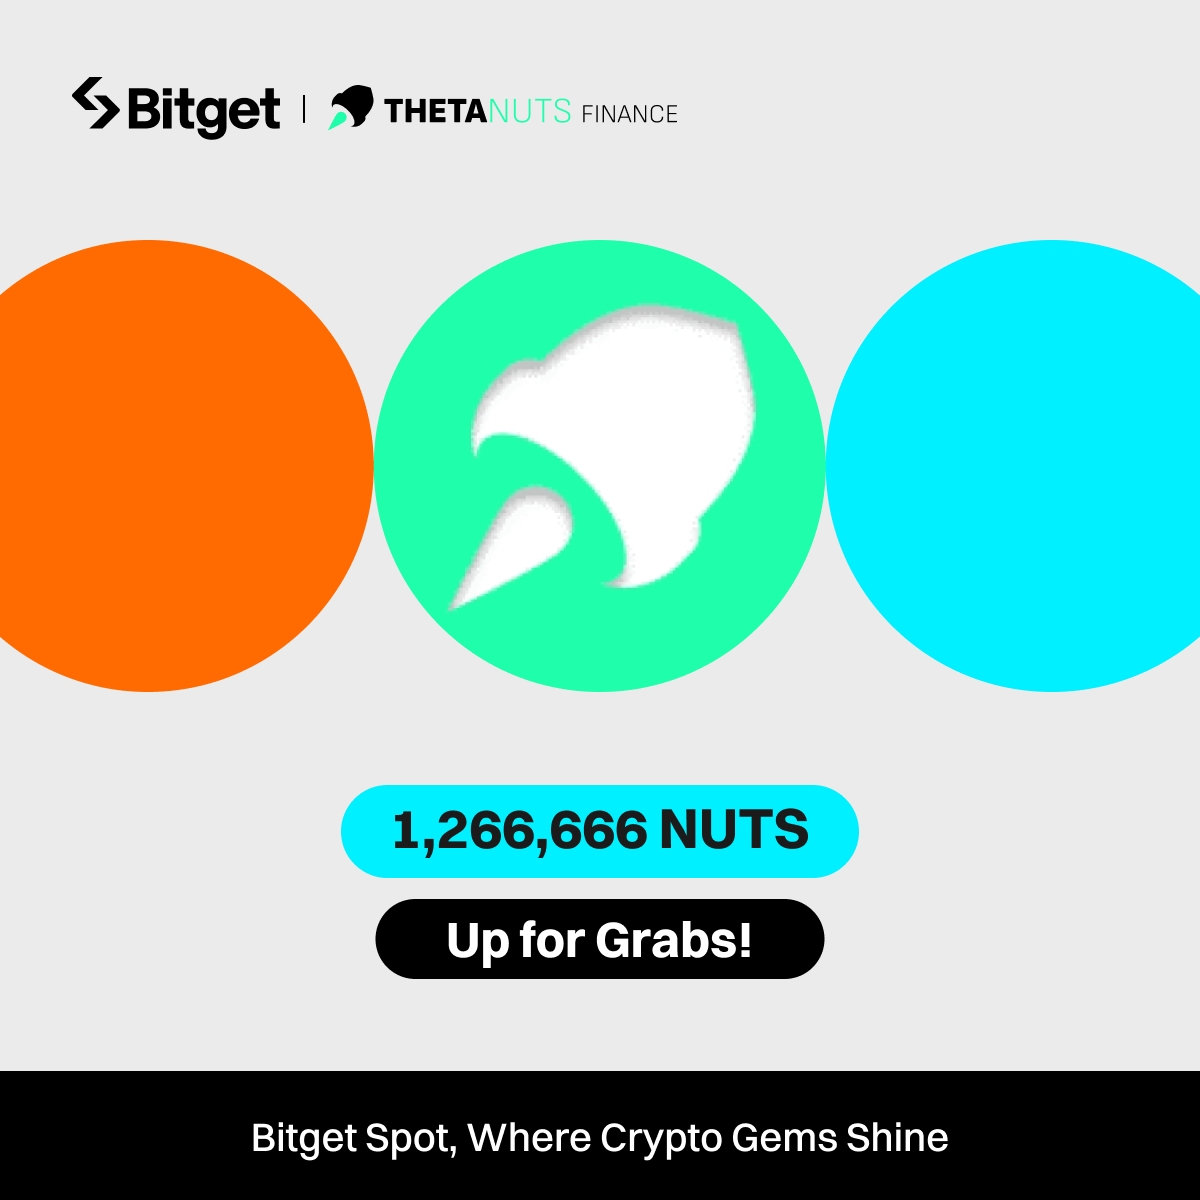 #Bitget x Thetanuts Finance: 1,266,666 $NUTS up for grabs! 

To enter: 
🔹 Follow @bitgetglobal & @ThetanutsFi
🔹 Repost with #NUTSlistBitget & tag your friends 
🔹 Fill out: forms.gle/BNG51YrZjHaHdF…

🔥 Join the event: bitget.com/support/articl…